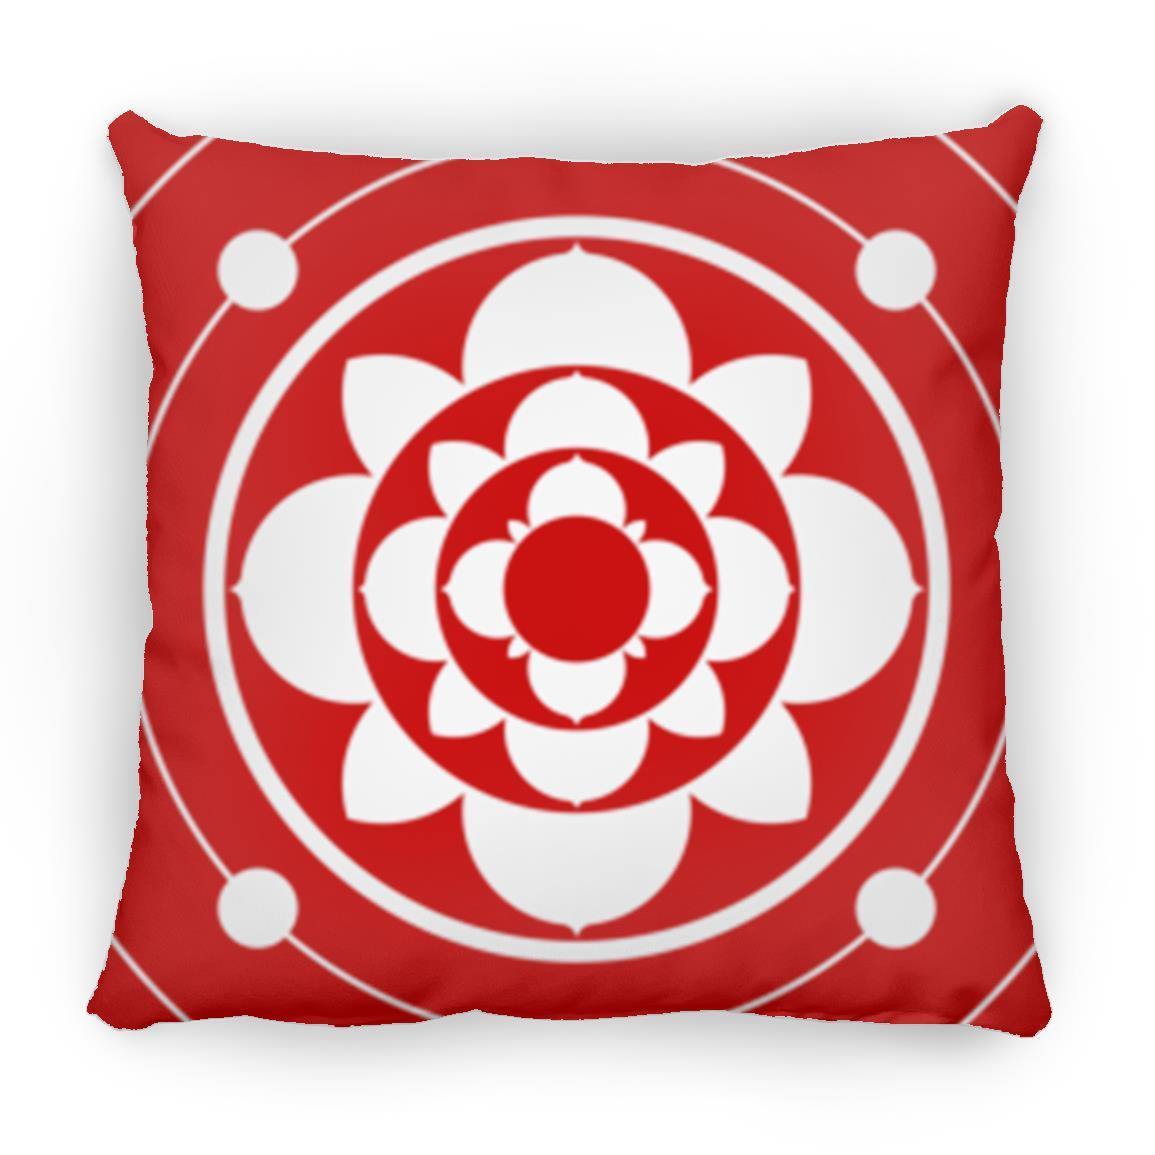 Crop Circle Pillow - Merstham - Shapes of Wisdom